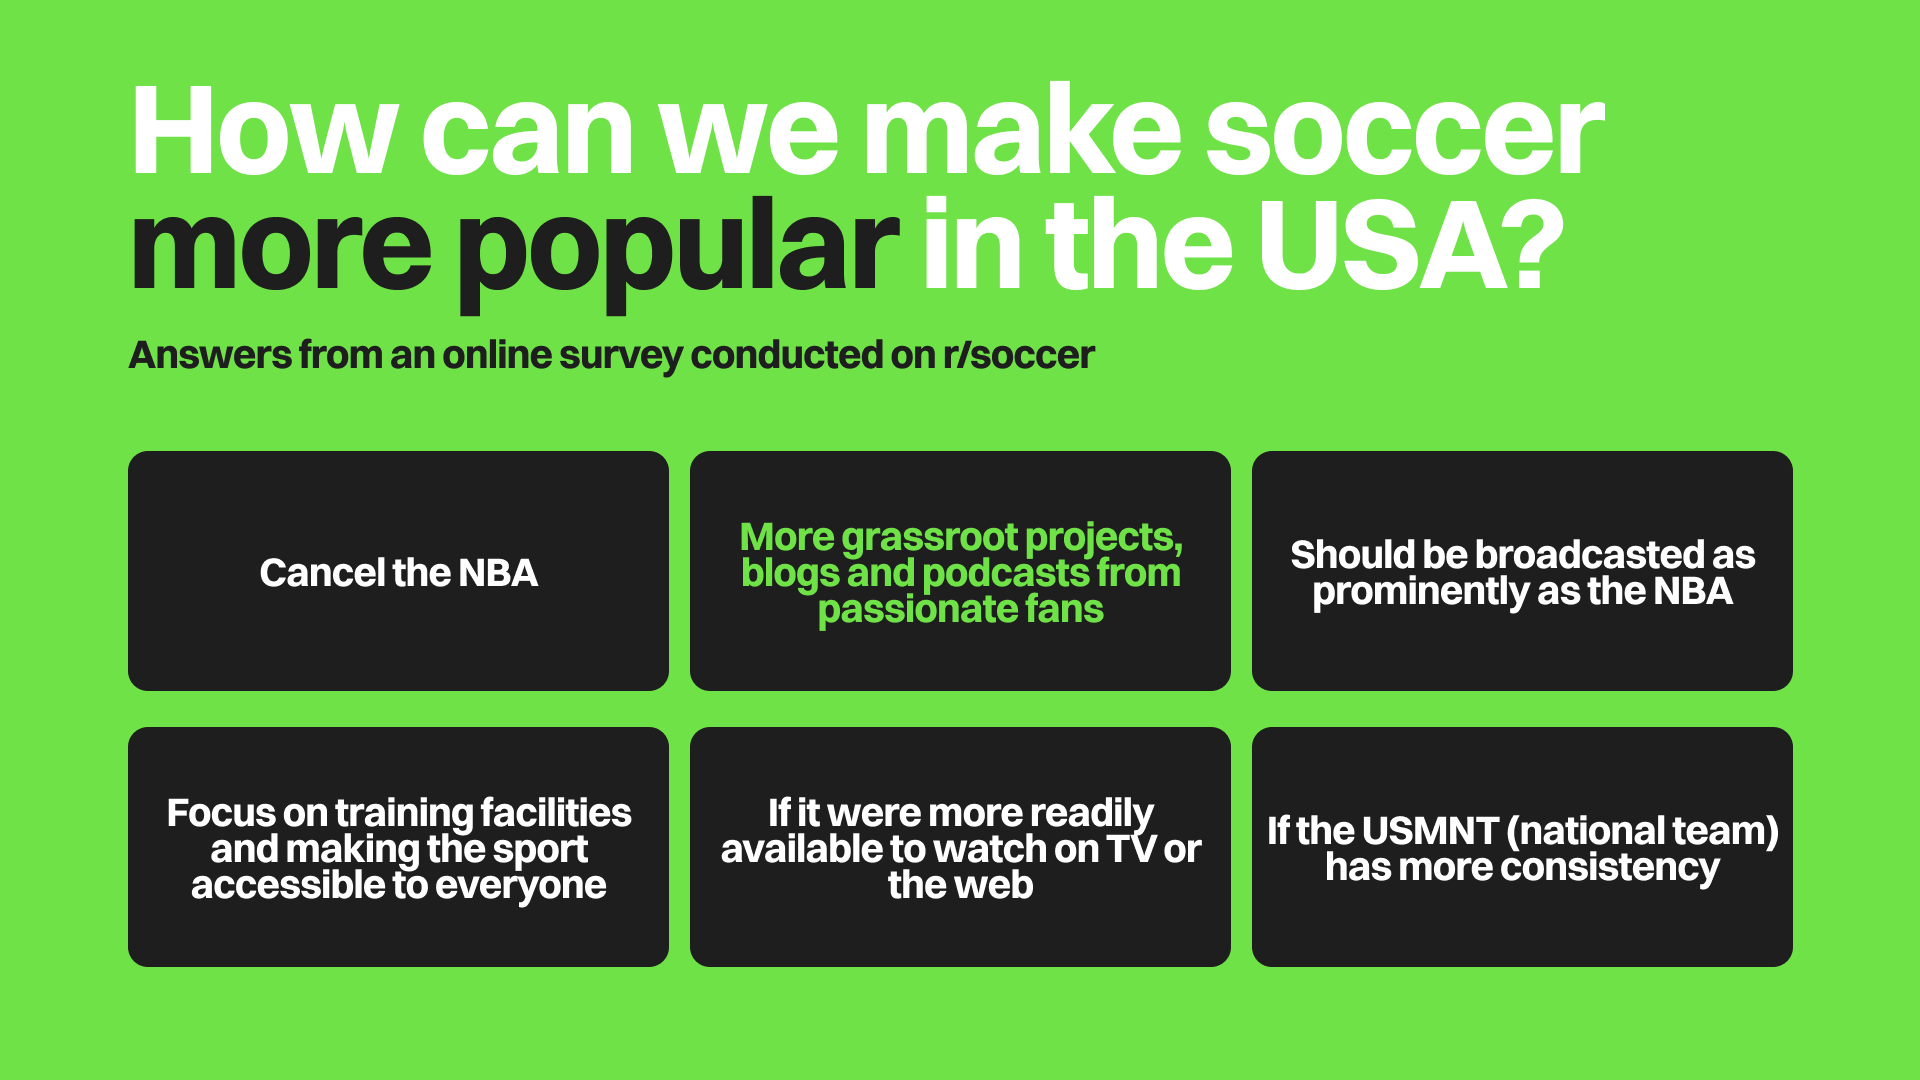 Responses from a survey conducted about soccer in the USA.